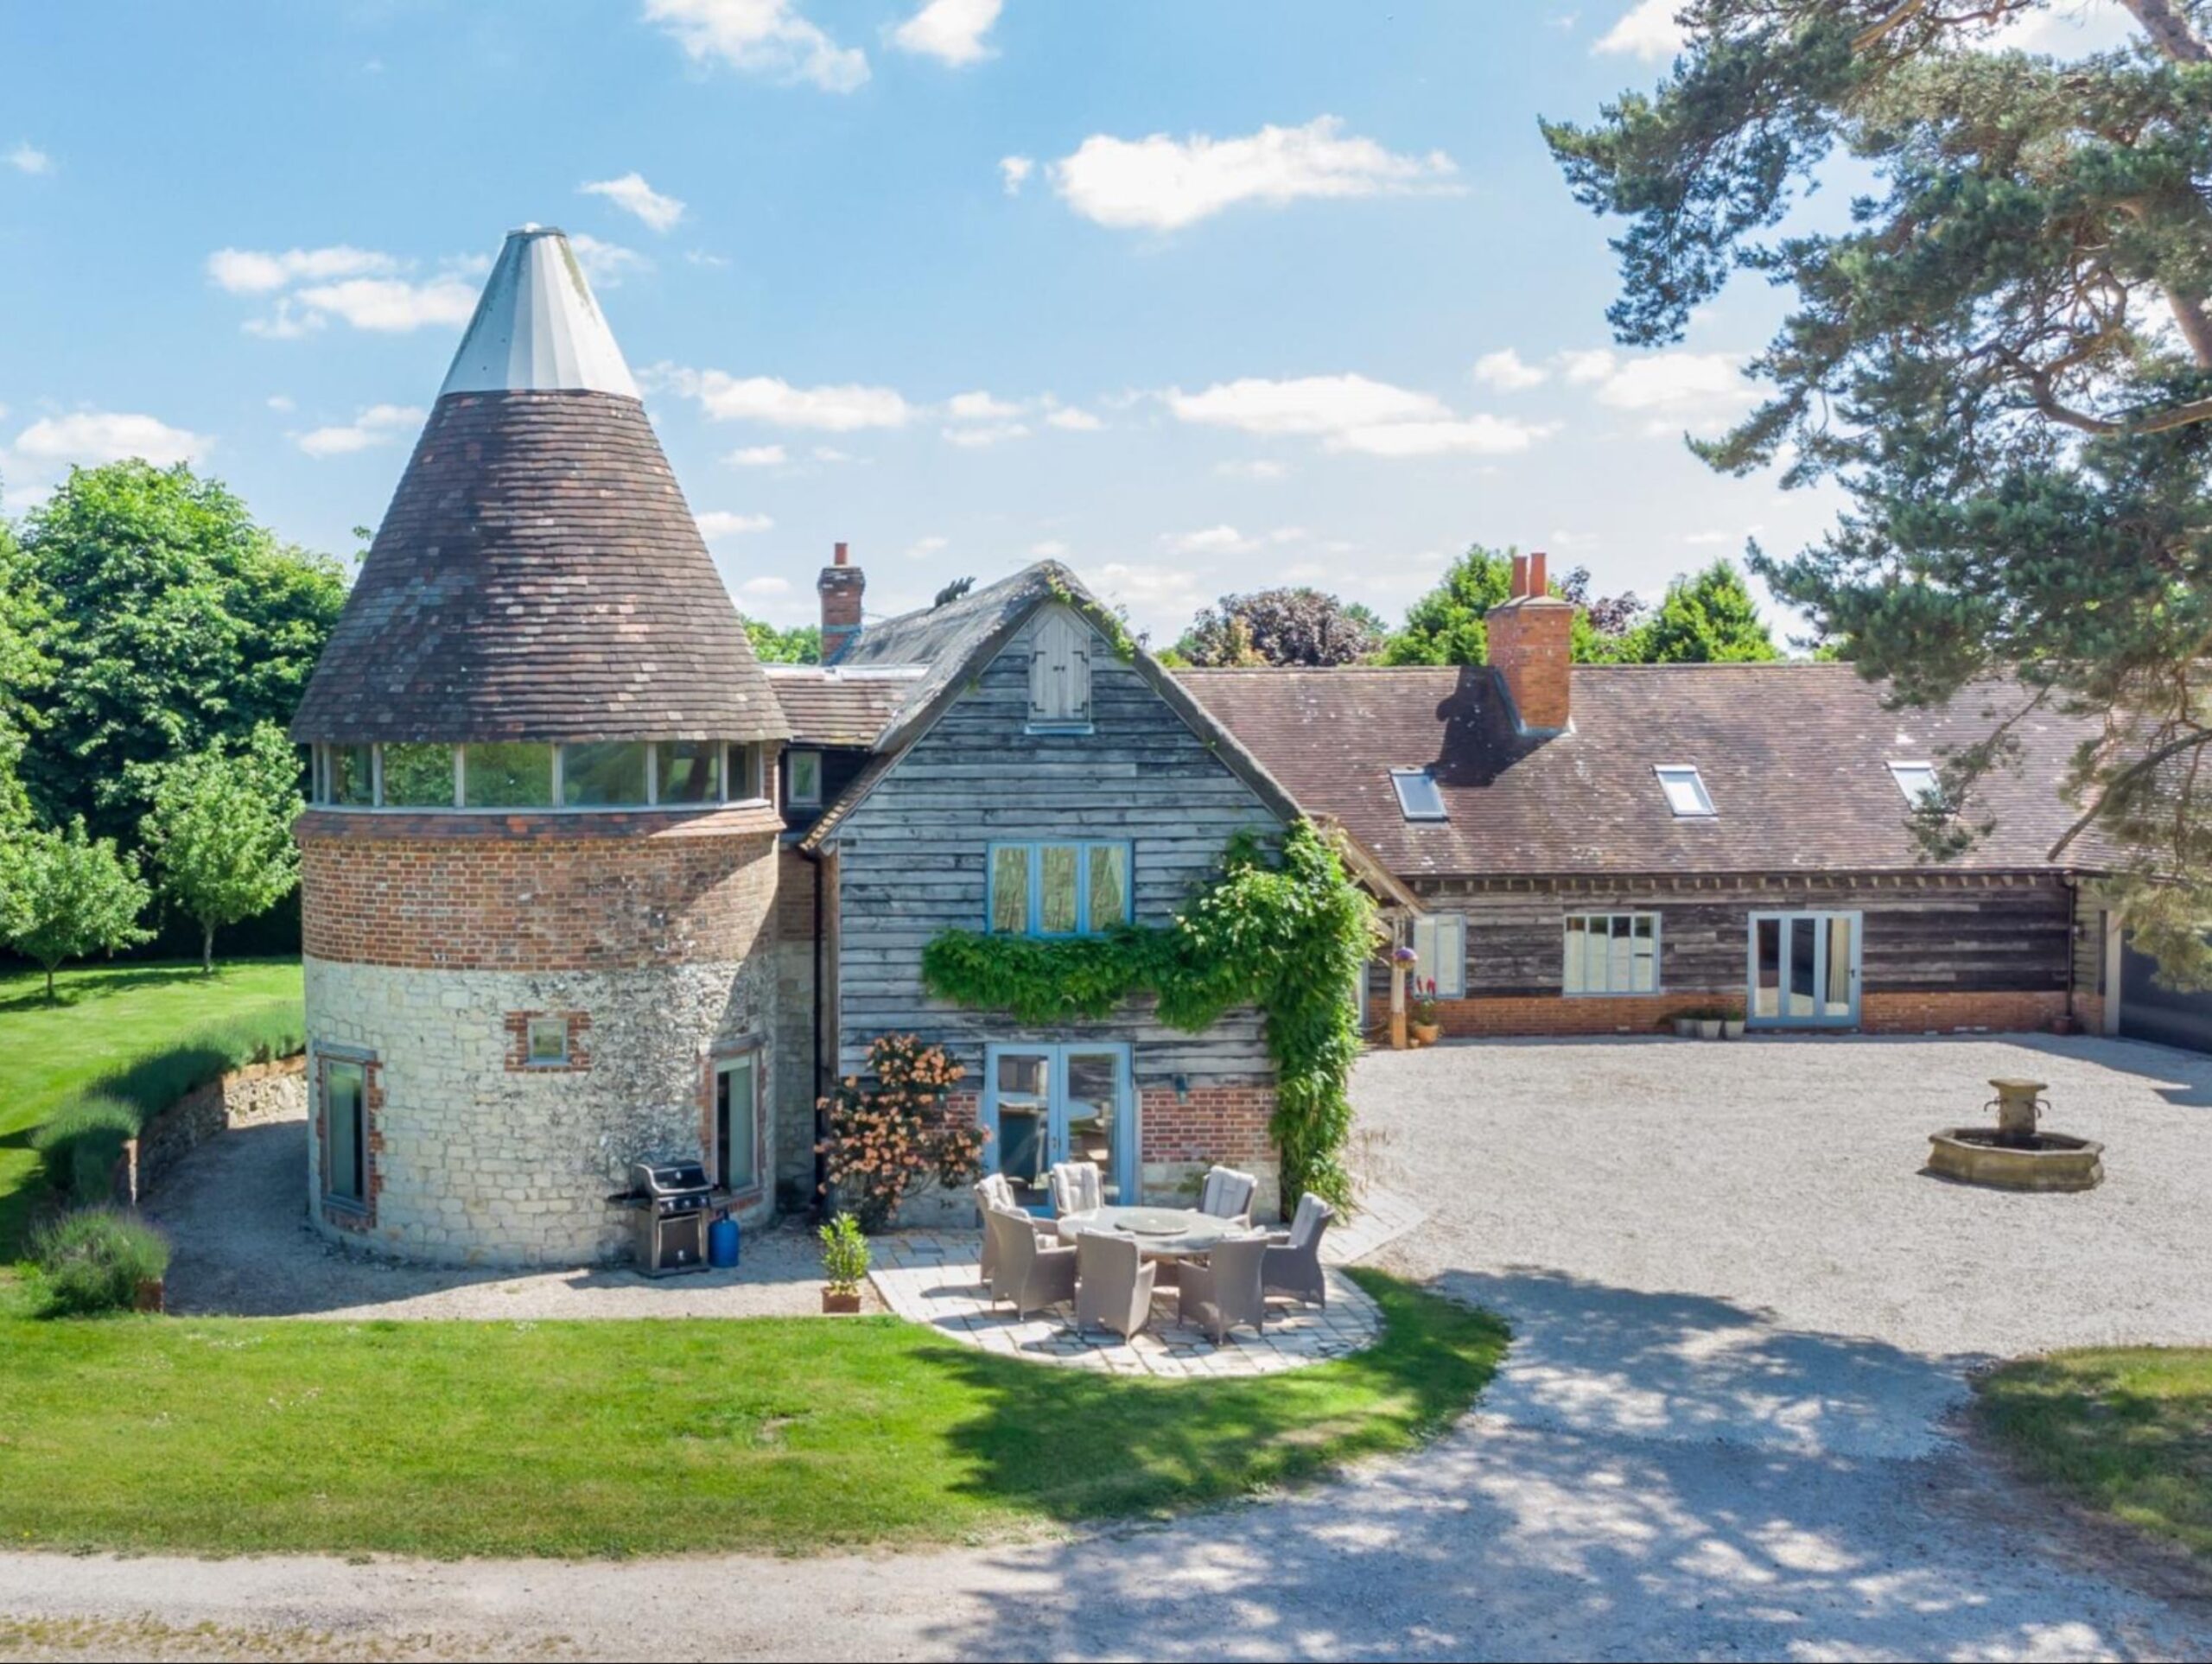 The Oast House, Hampshire, SouthCoast LocationFinder